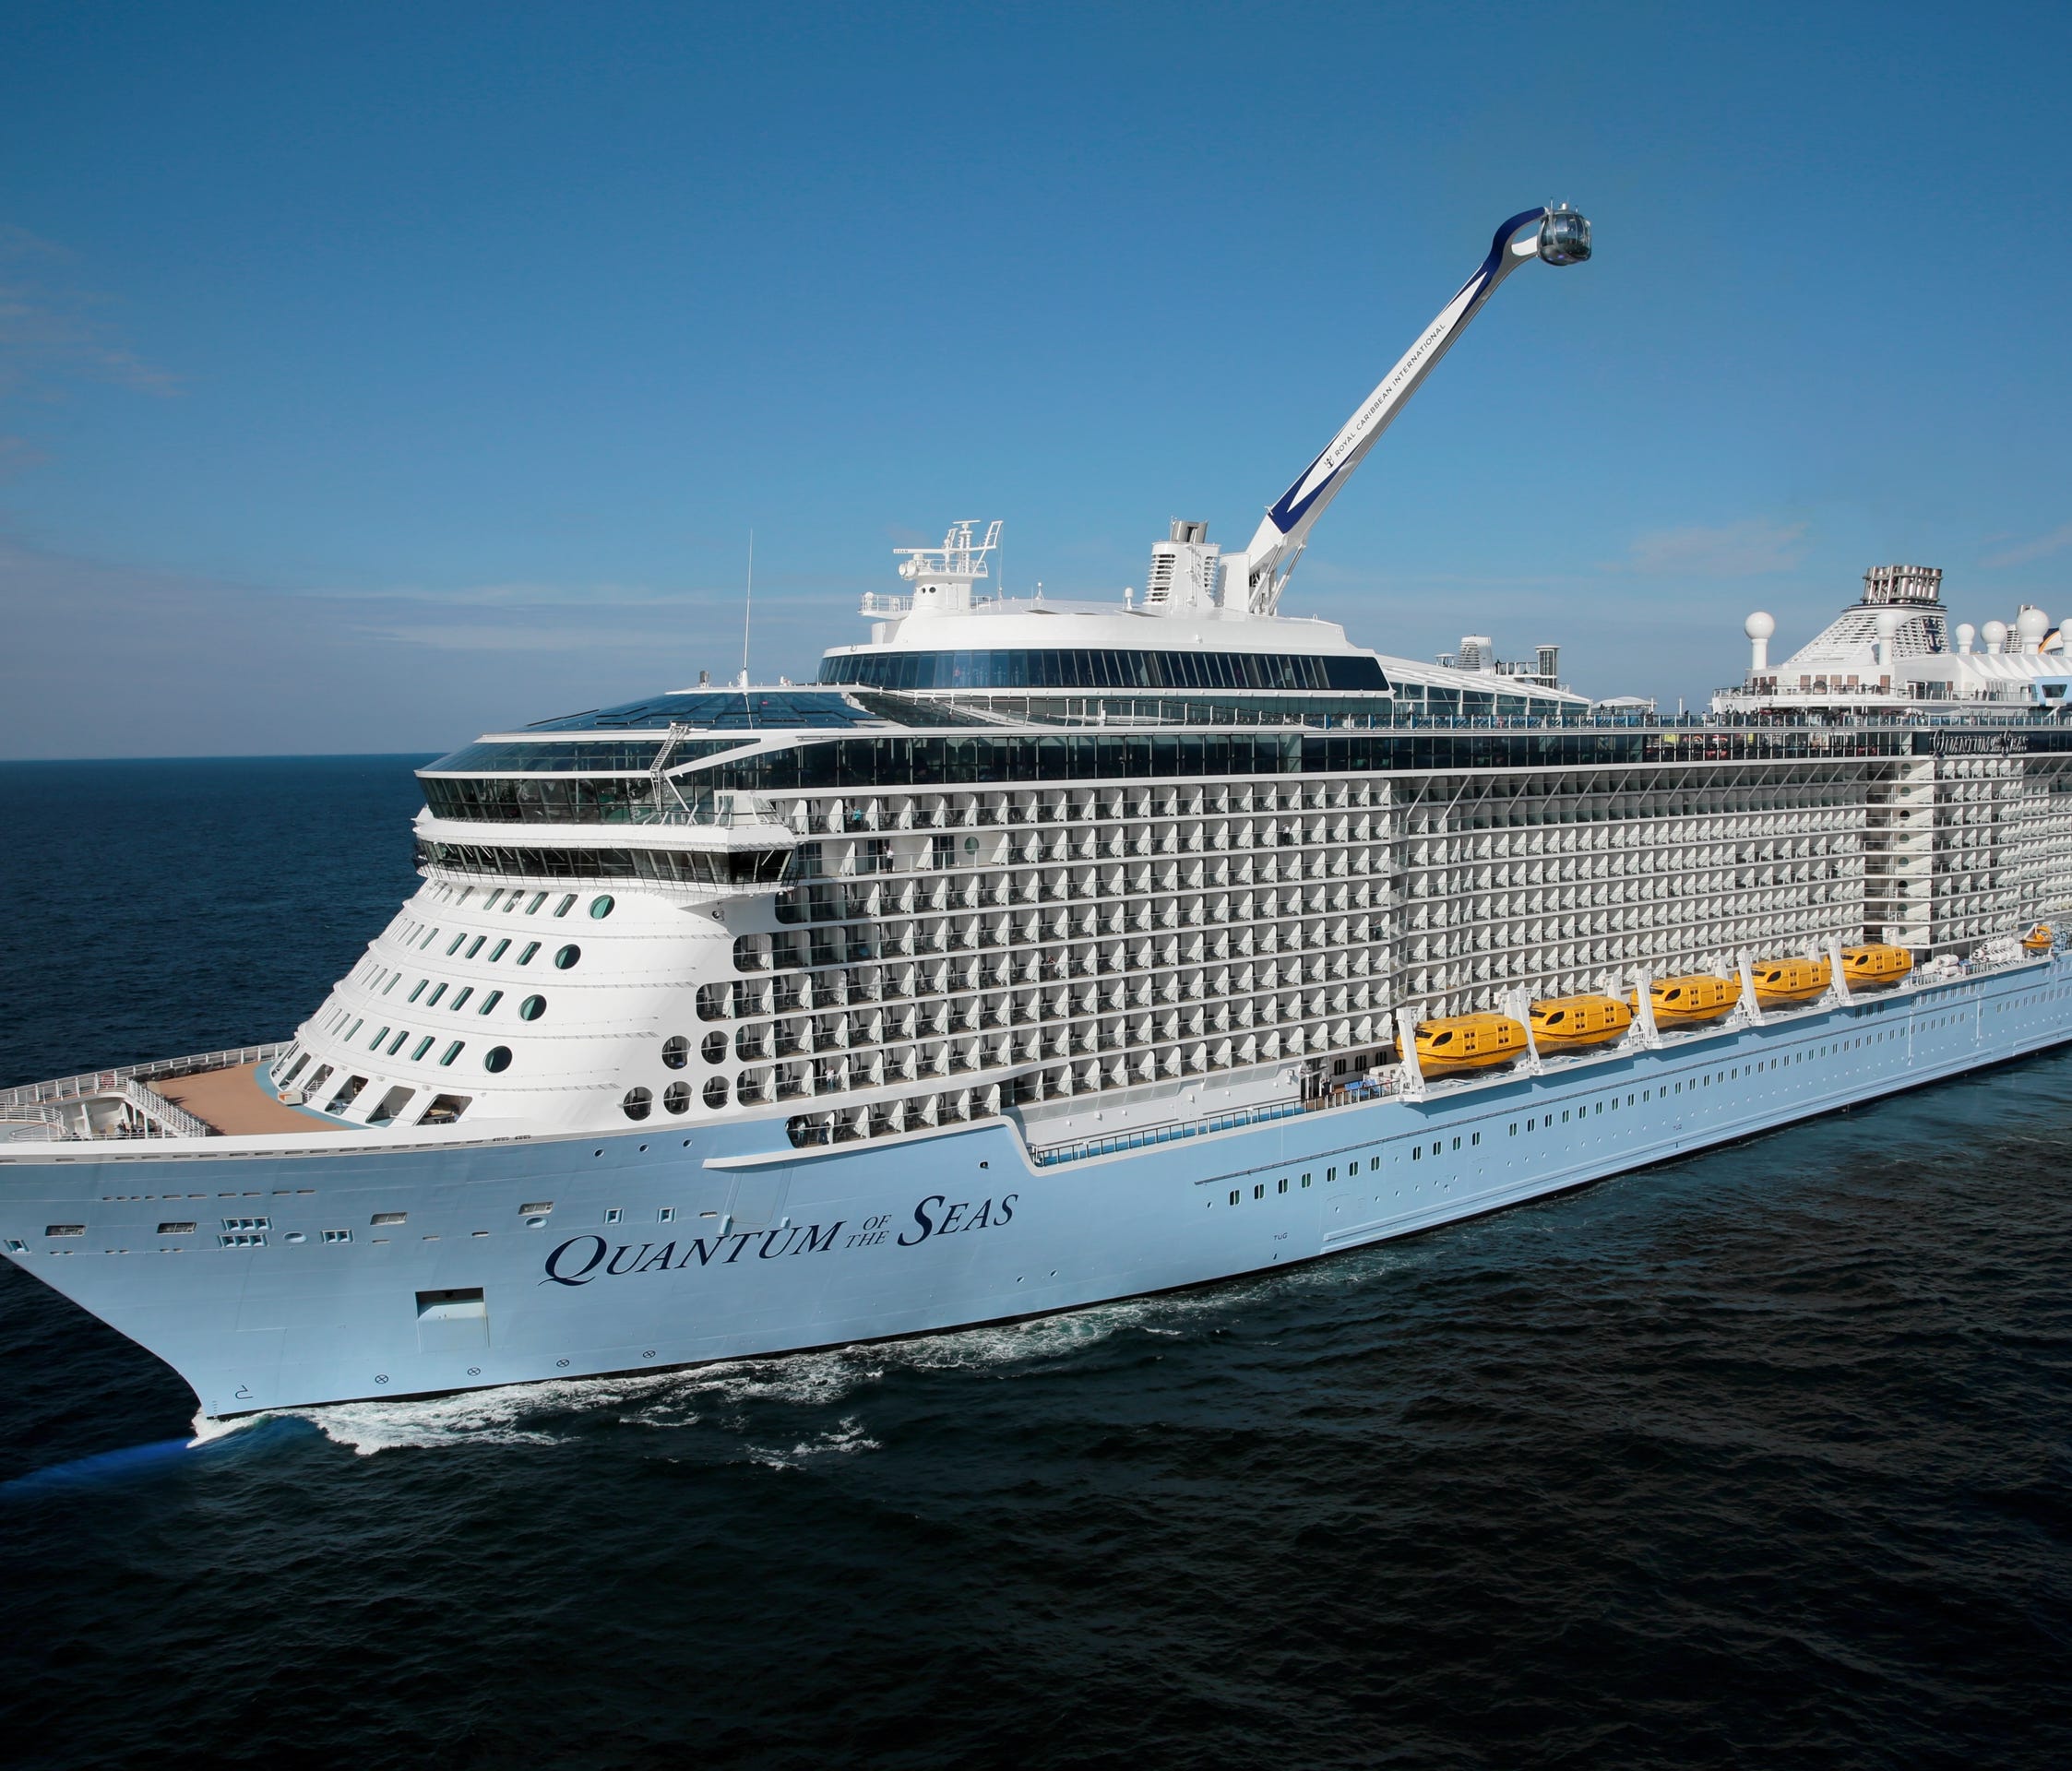 Scheduled to debut in April 2016, Royal Caribbean's 4,180-passenger Ovation of the Seas will be a sister to the line's Quantum of the Seas, shown here.